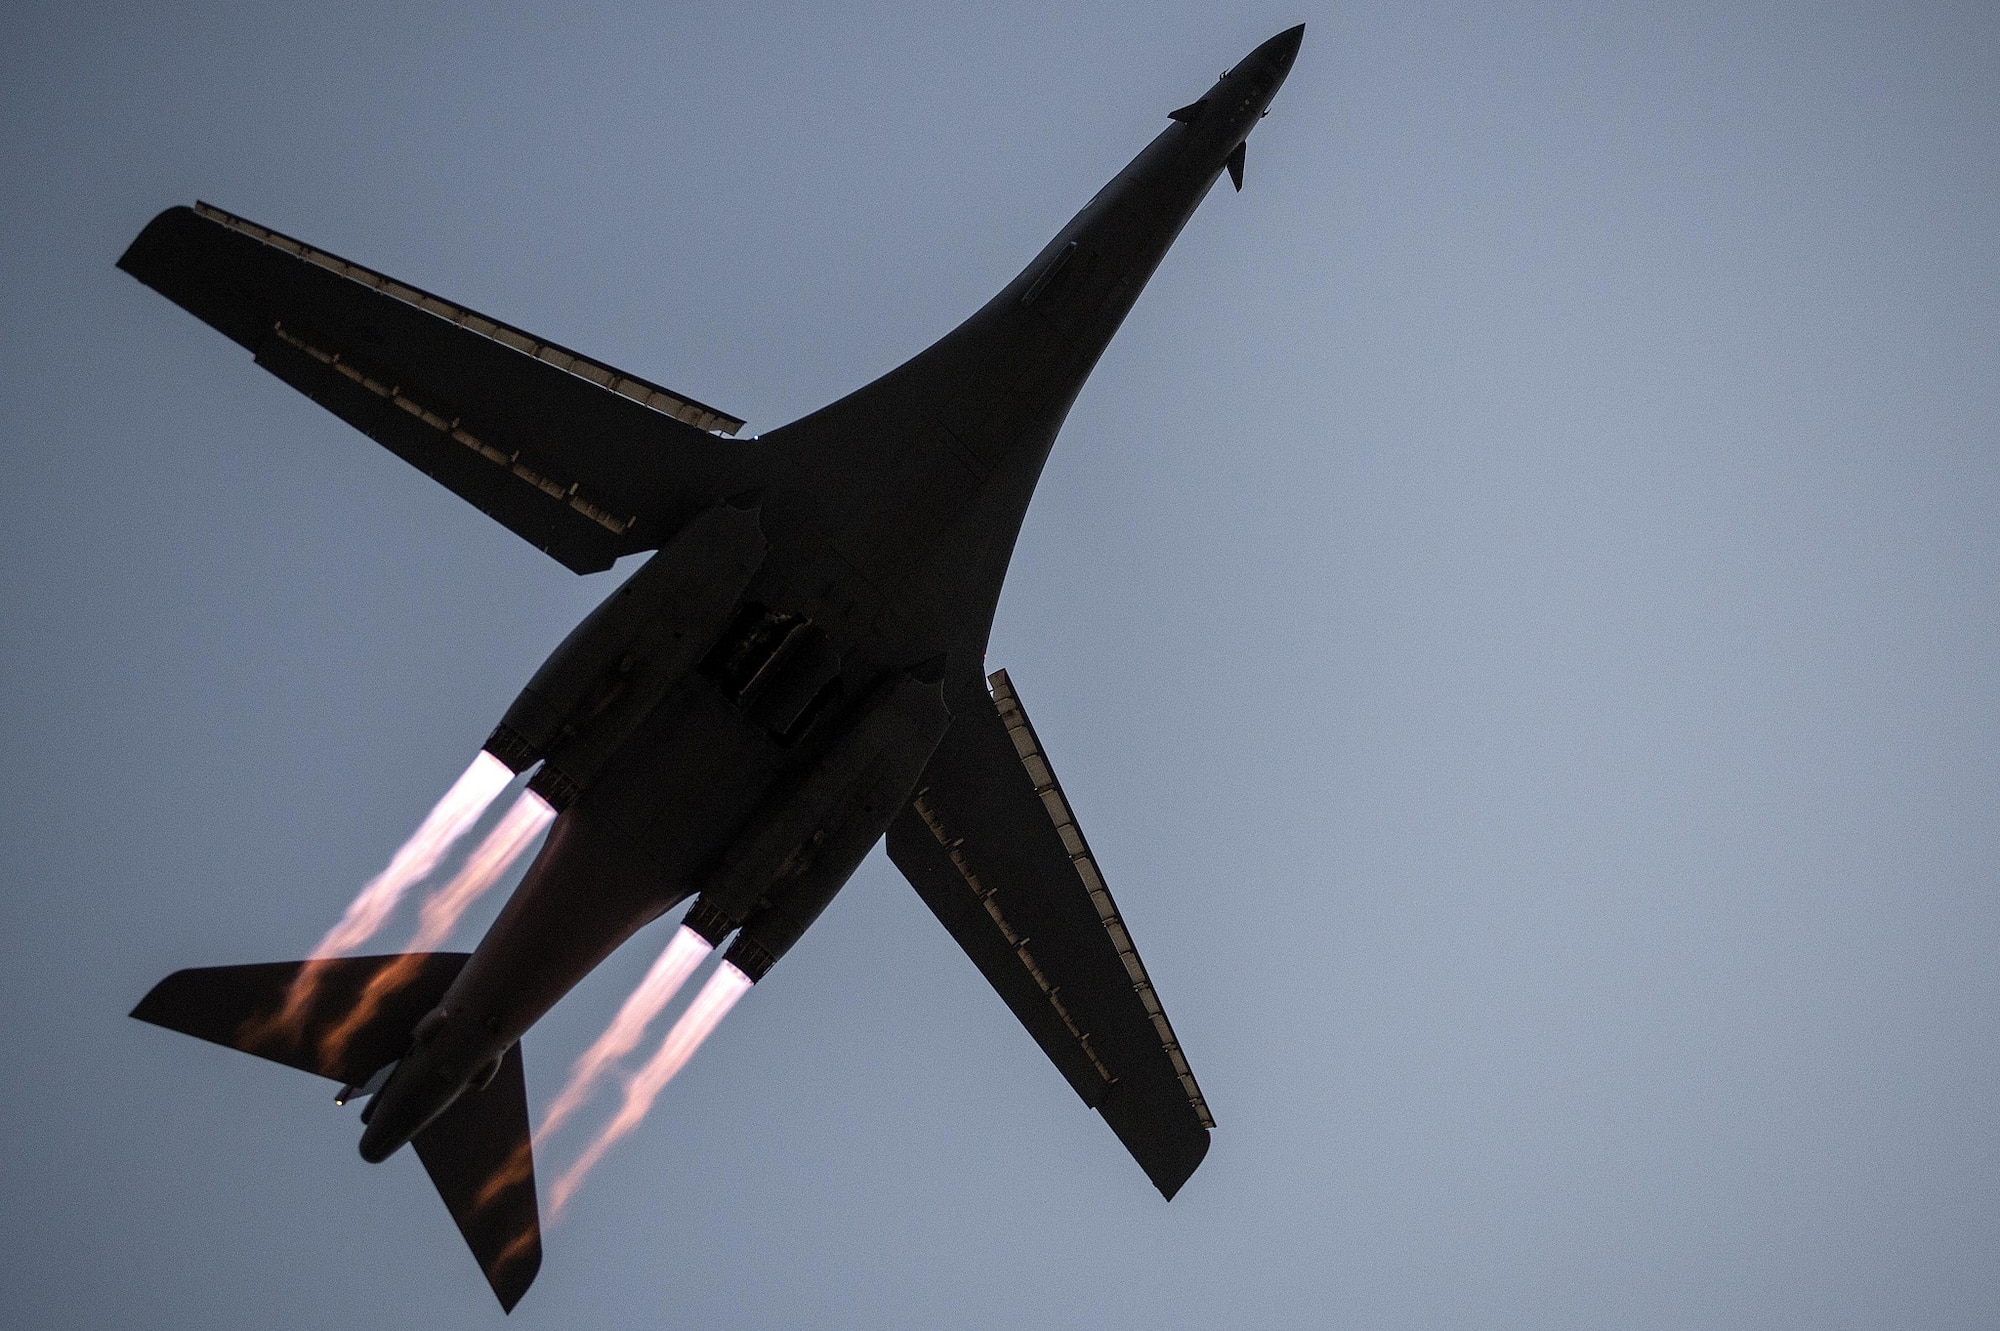 A B-1B Lancer takes off from Al Udeid Air Base, Qatar, to conduct combat operations April 8, 2015. Al Udeid AB is a strategic coalition base that supports over 90 combat and support aircraft and houses more than 5,000 military personnel. (U.S. Air Force photo/Senior Airman James Richardson)